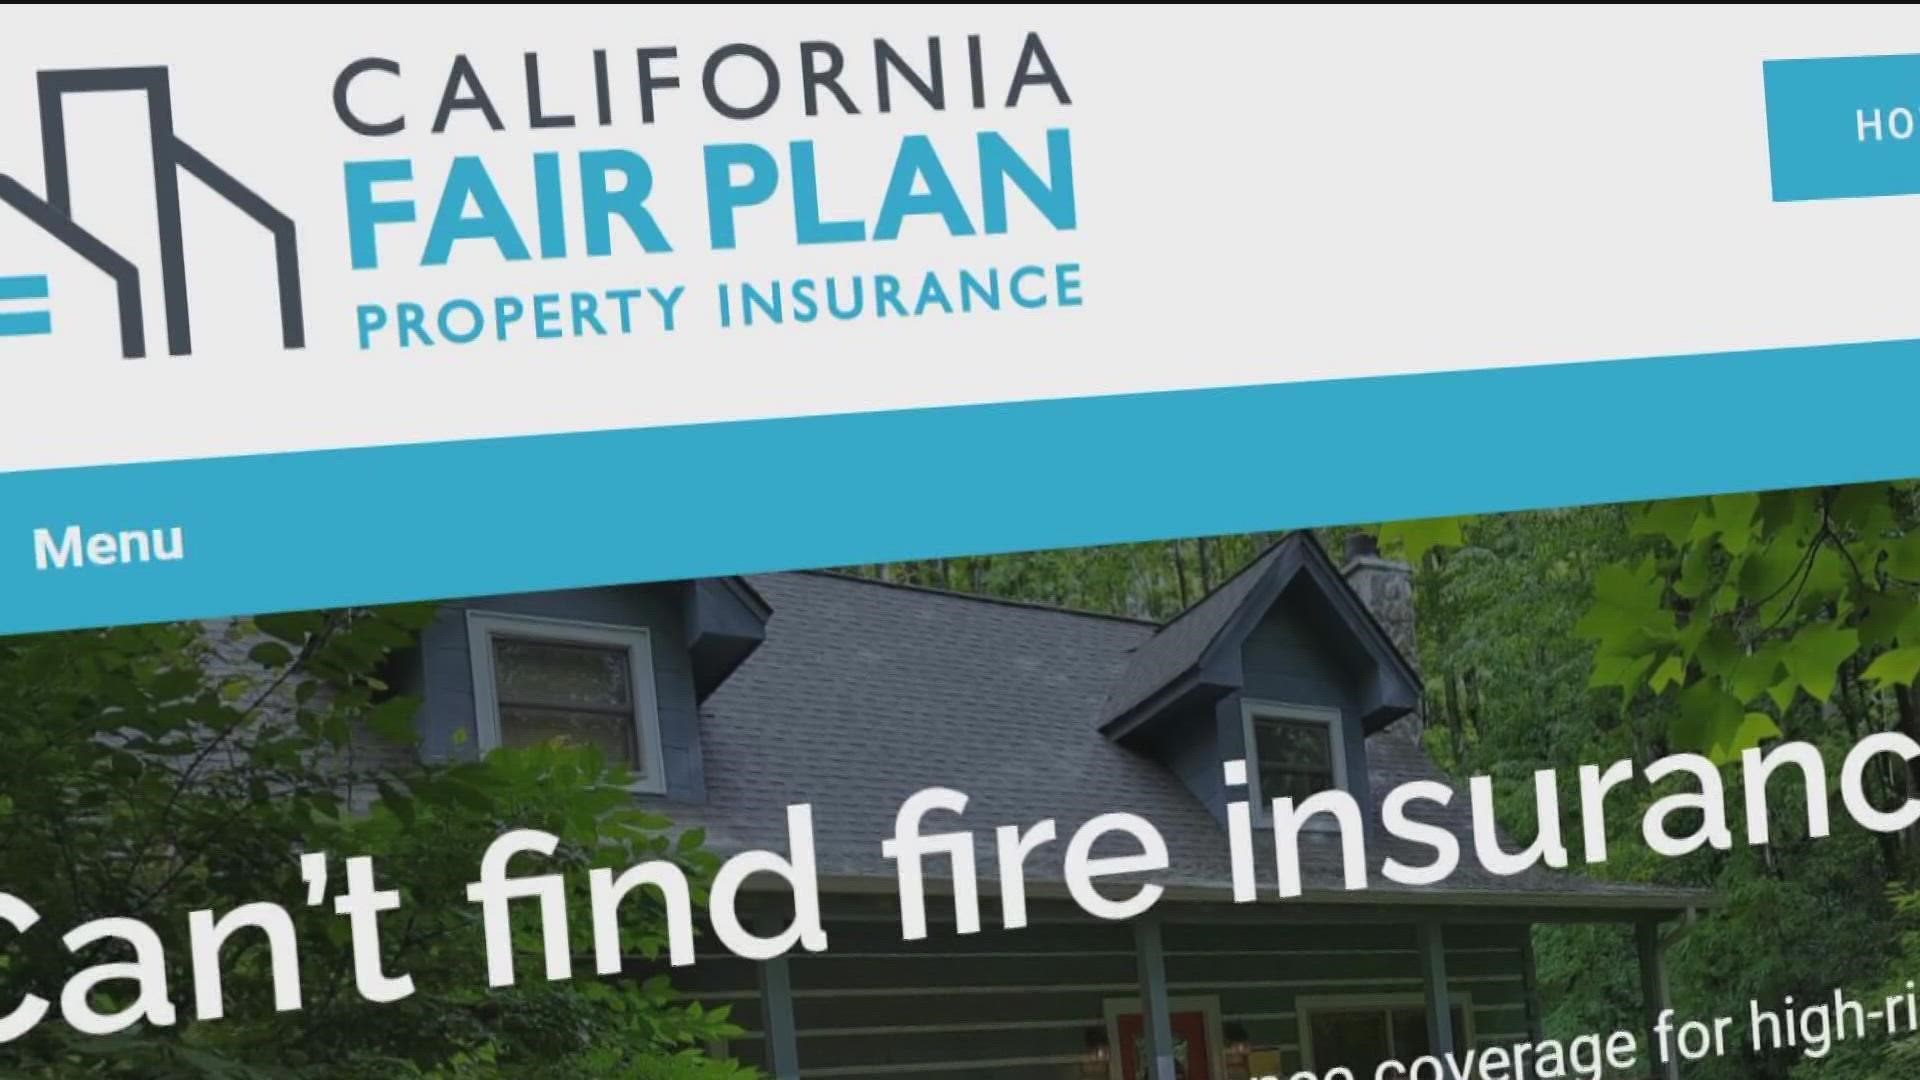 Insurance premiums for fire protection are skyrocketing, and in some cases, policies are being canceled.